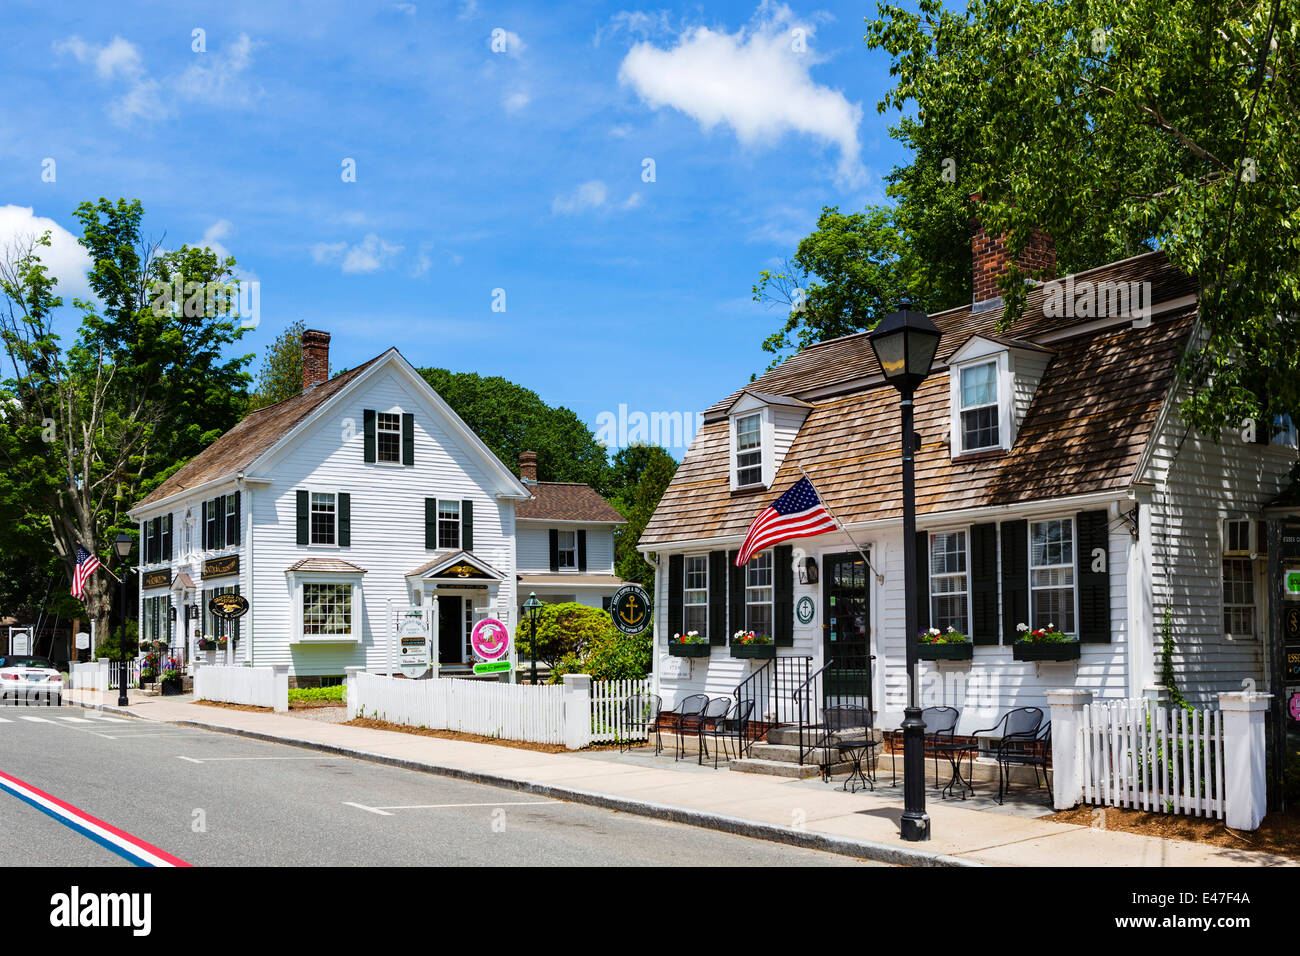 Historic old buildings on Main Street in the old town, Essex, Connecticut, USA Stock Photo